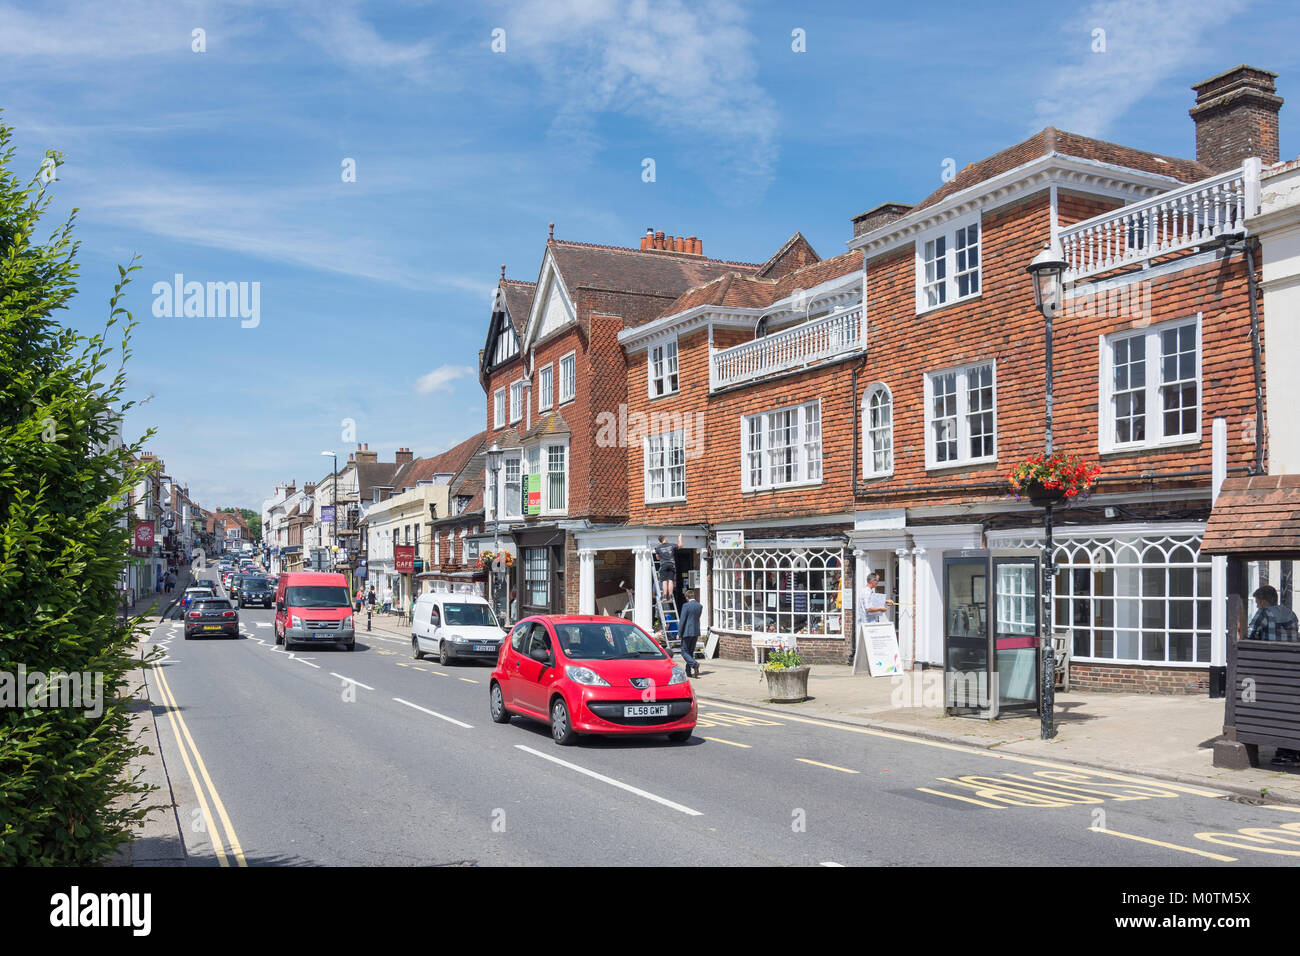 High Street, Battle, East Sussex, England, Regno Unito Foto Stock